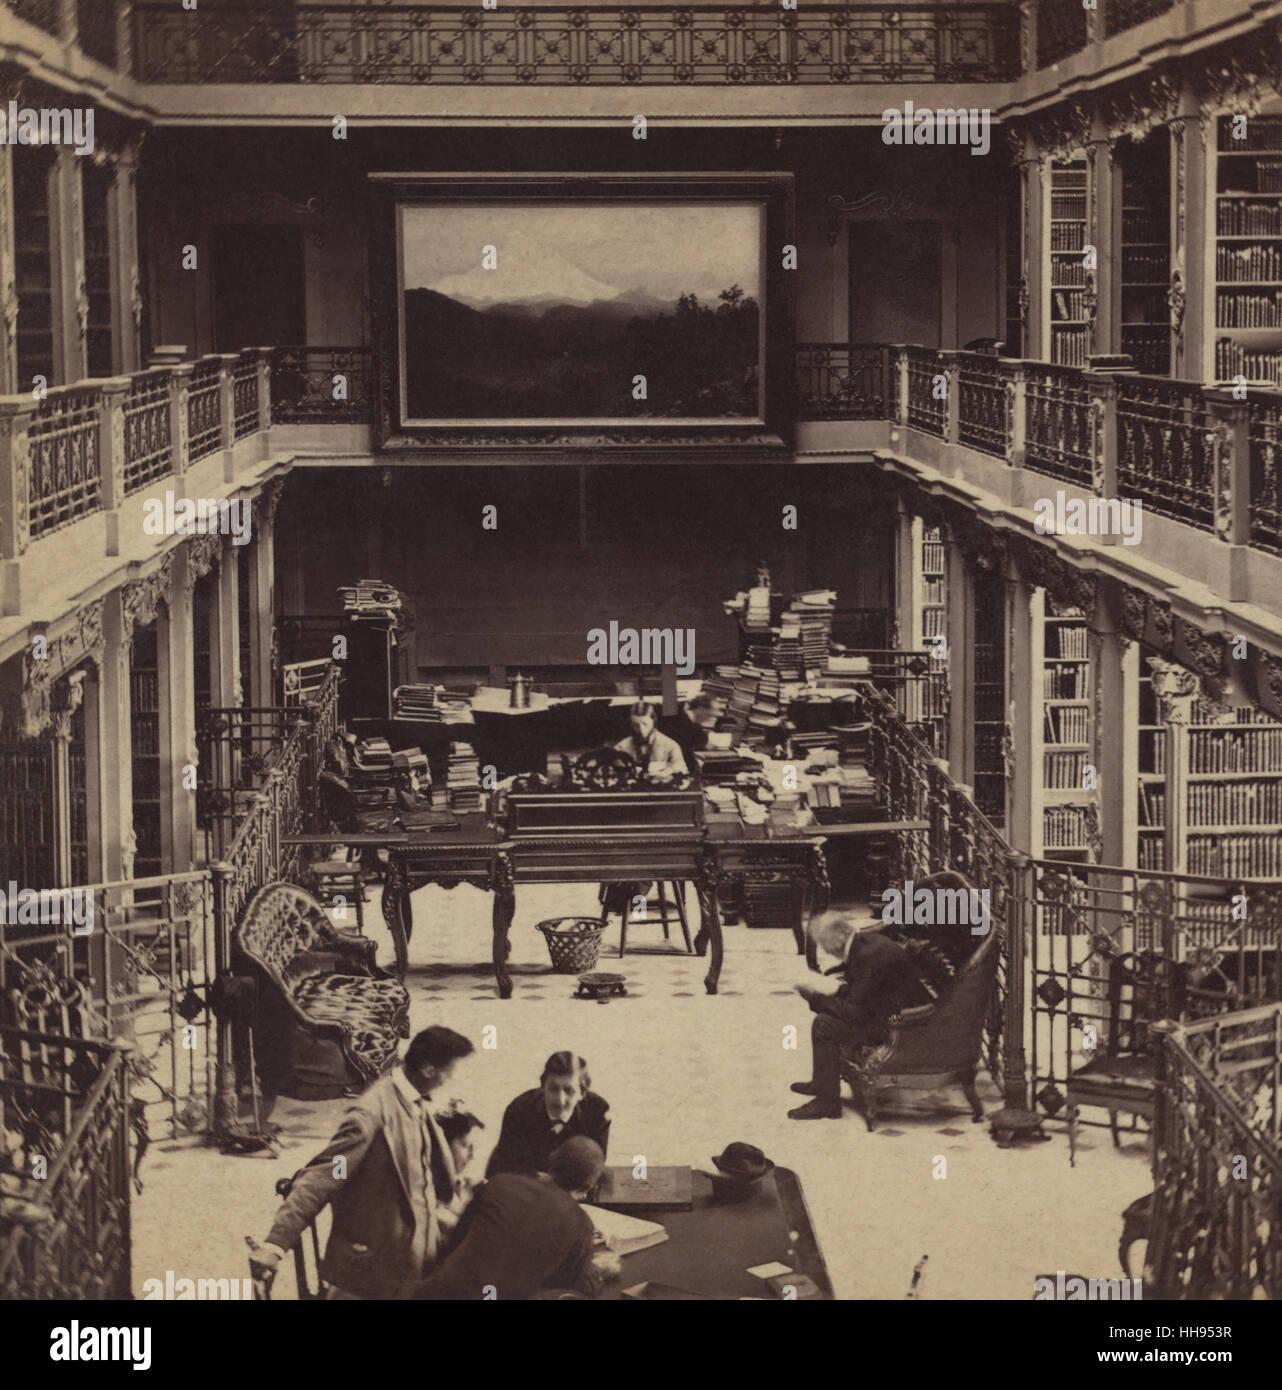 Library of Congress interior view with reading room and stacks in the U.S. Capitol building, c1866. (Photo by G.D. Wakely) Stock Photo